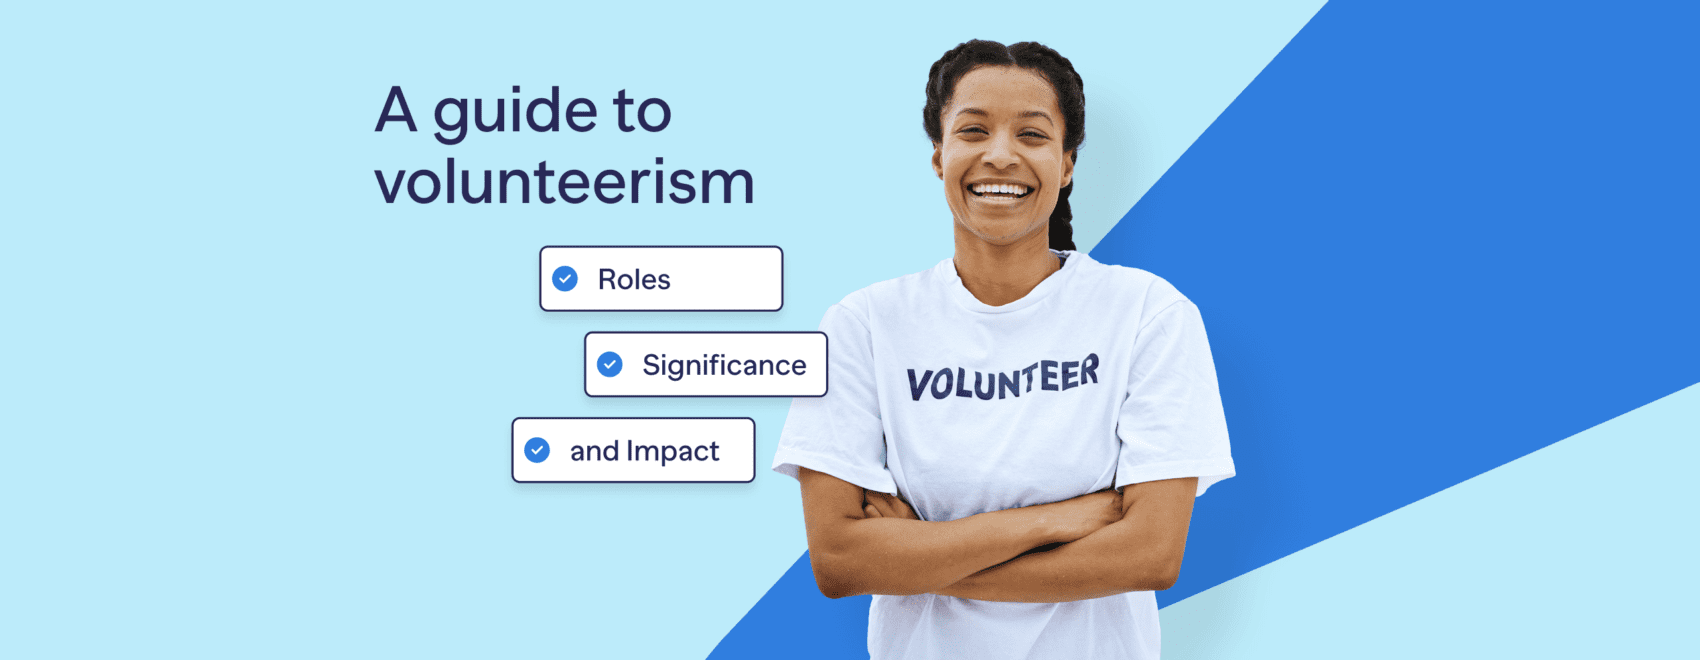 A guide to volunteerism roles, significance, and impact